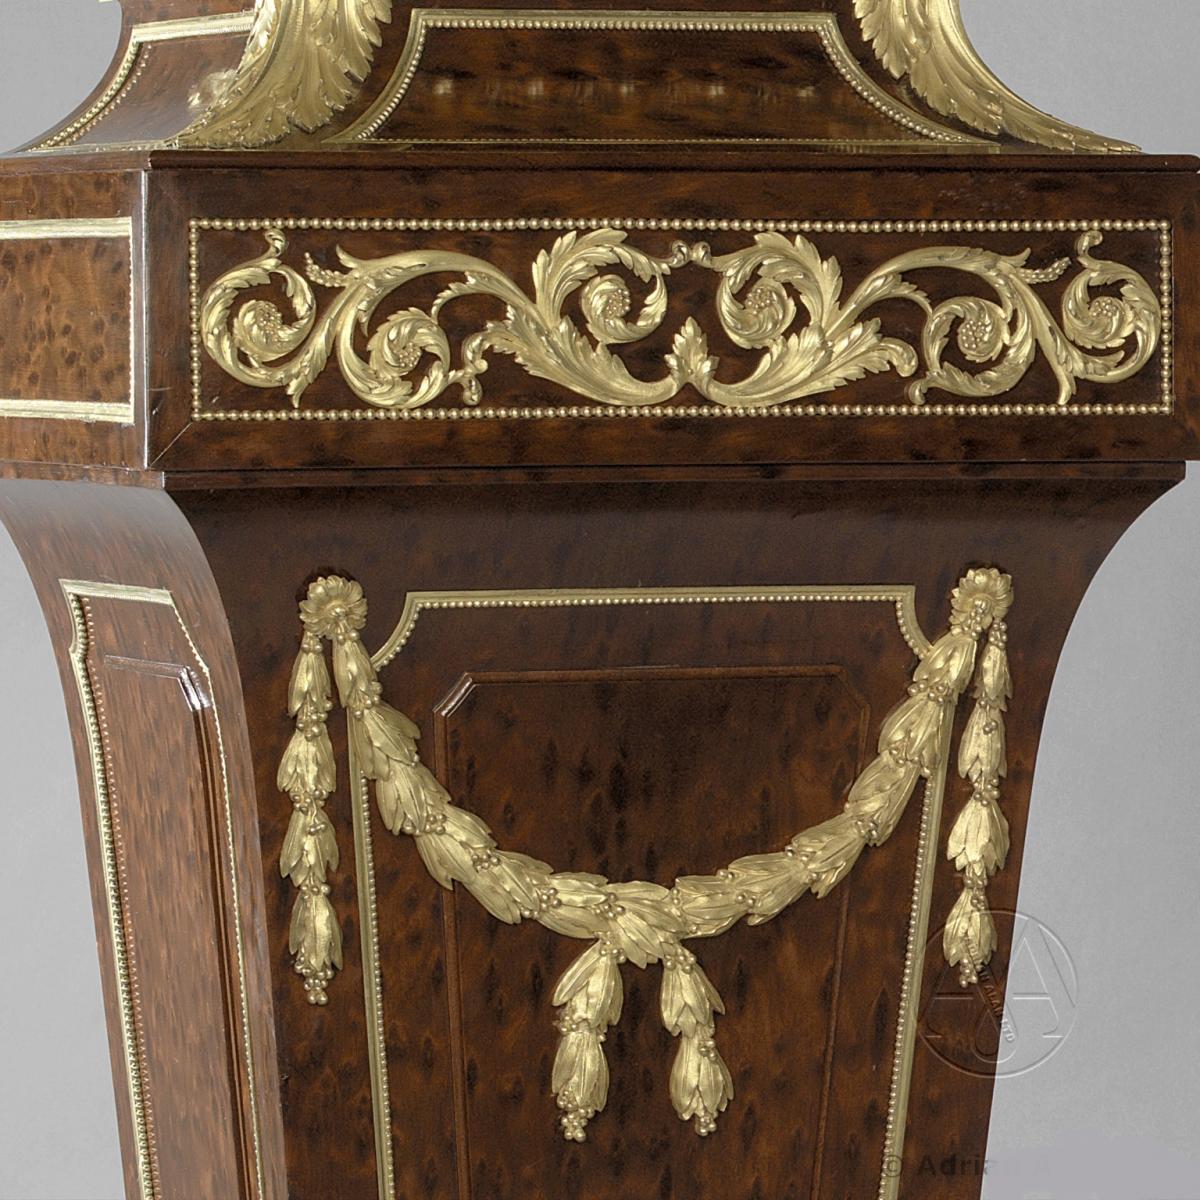 Pair of Louis XVI Style Mahogany Pedestals, Attributed to Sormani